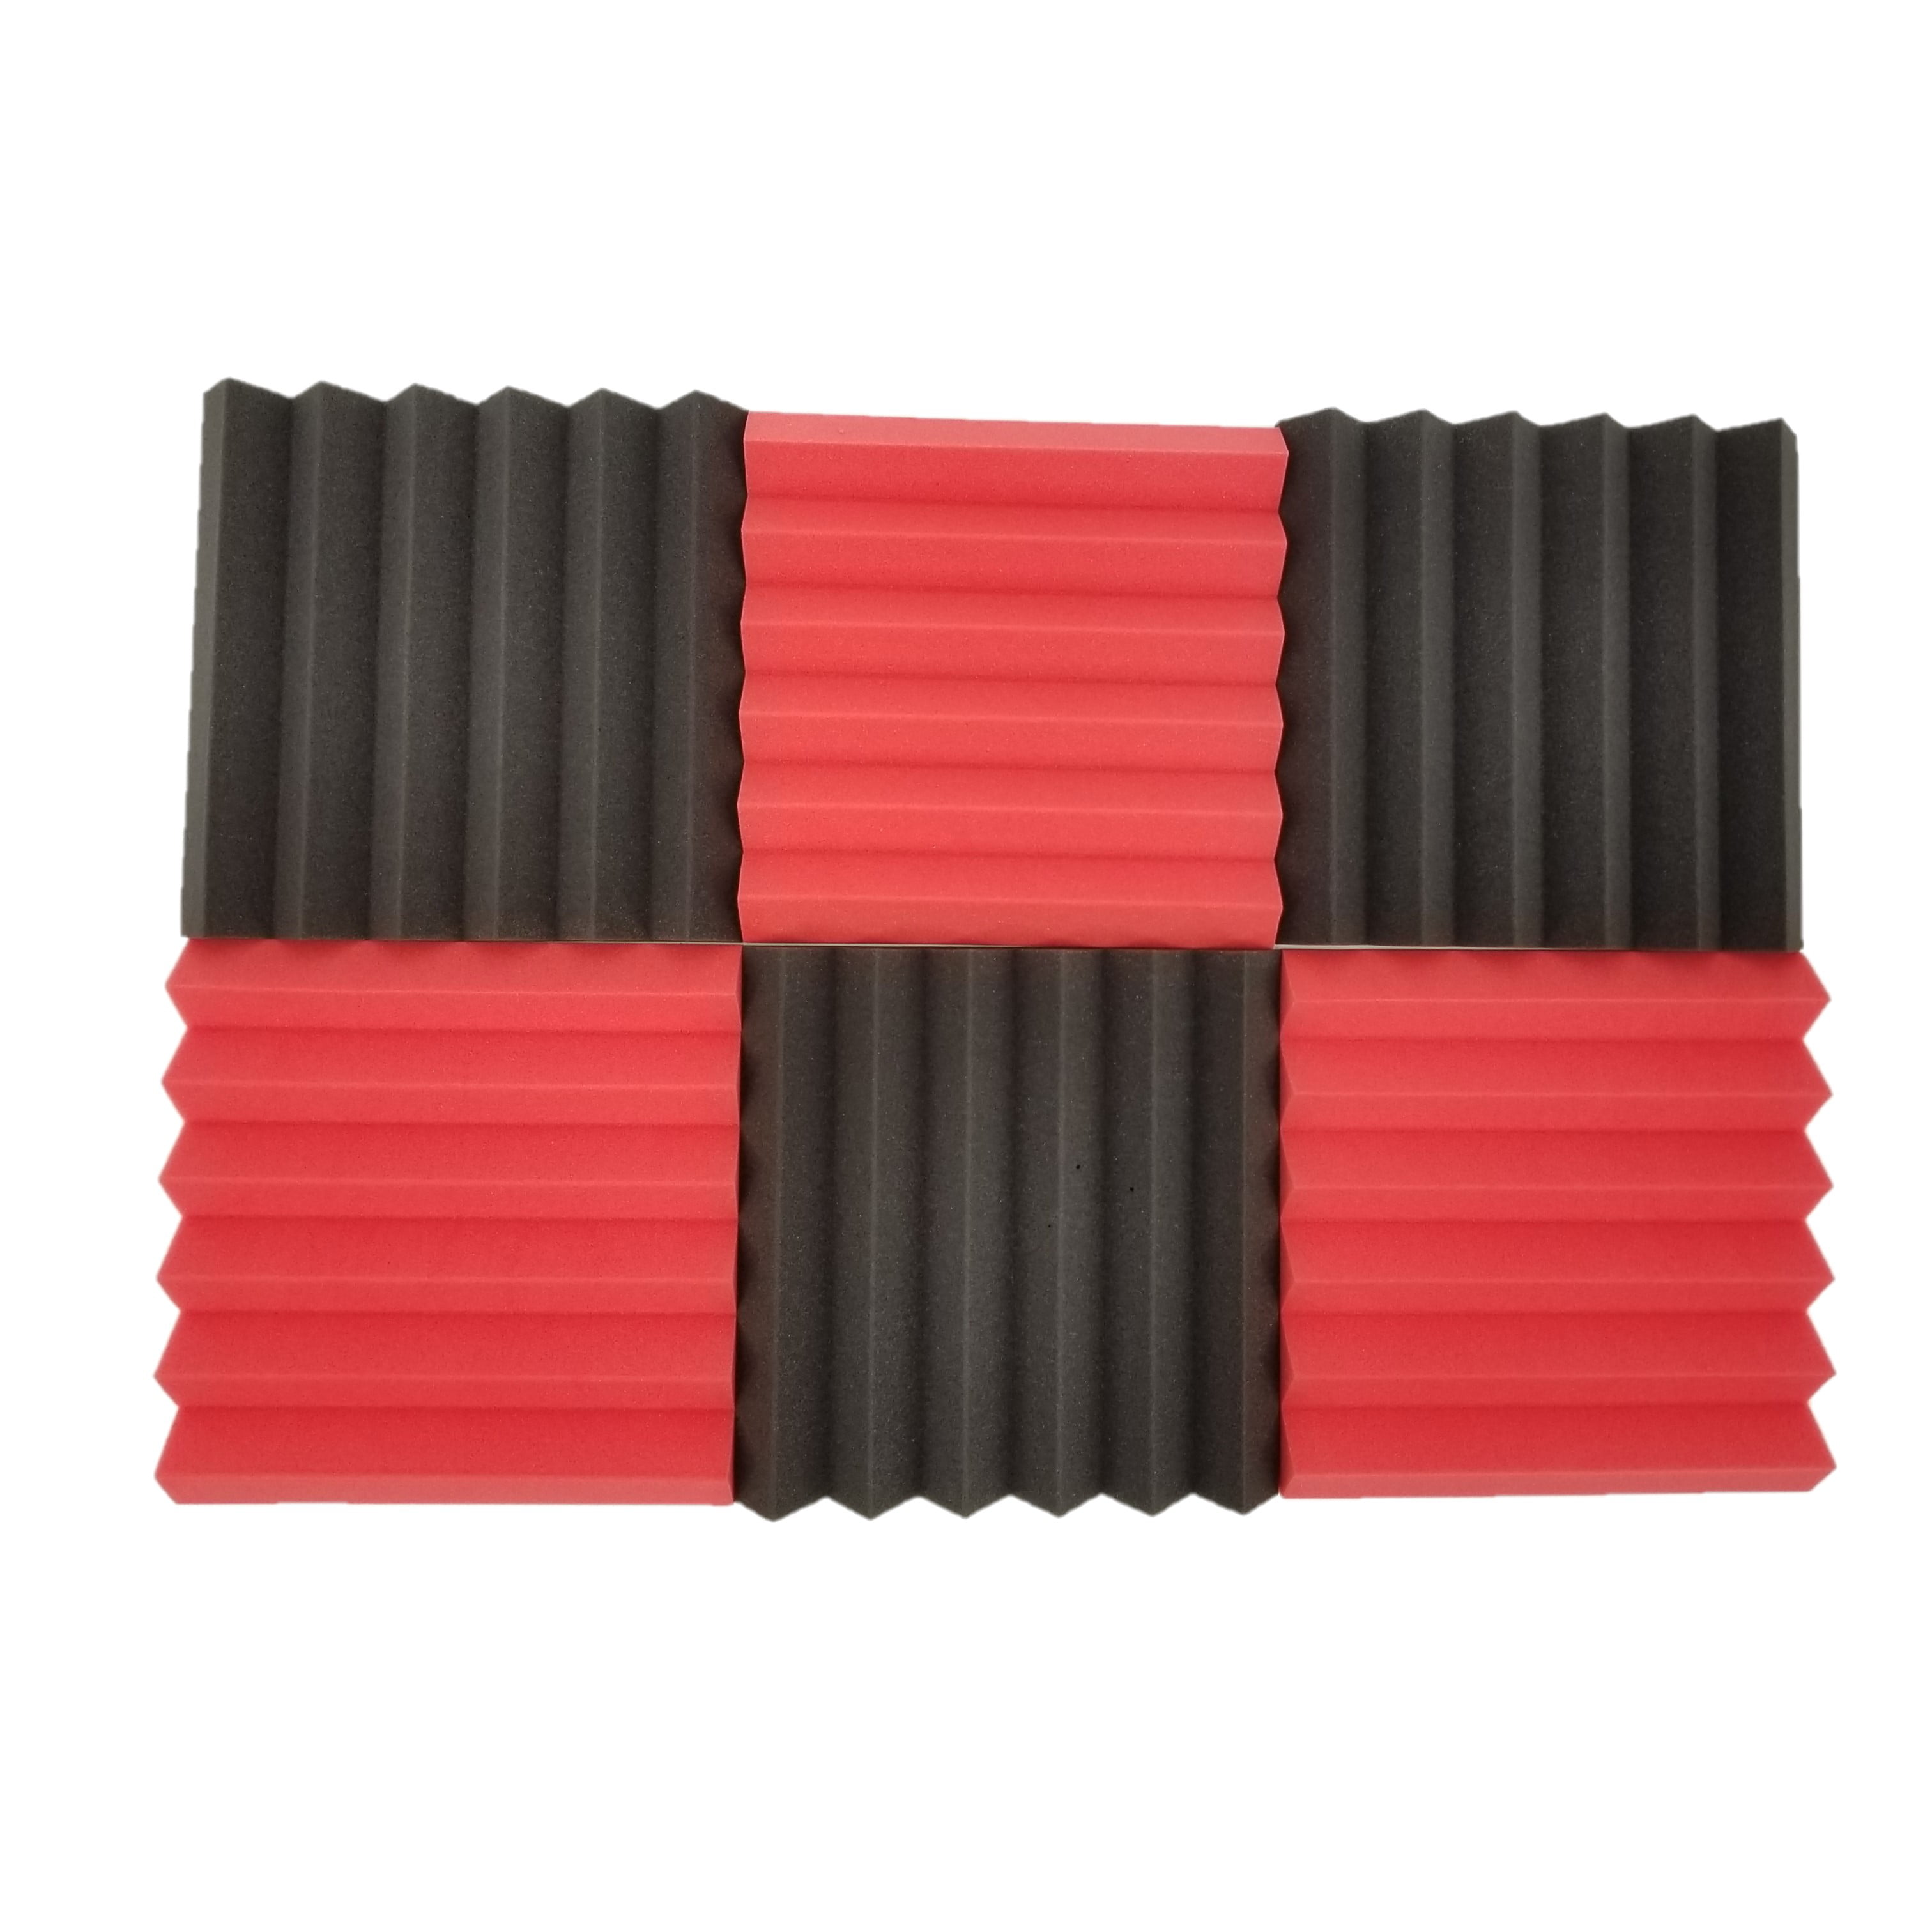 12 Pack, Black&Red 12 Pack Charcoal Acoustic Panels Studio Soundproofing Foam Wedges Tiles Fireproof 2 X 12 X 12